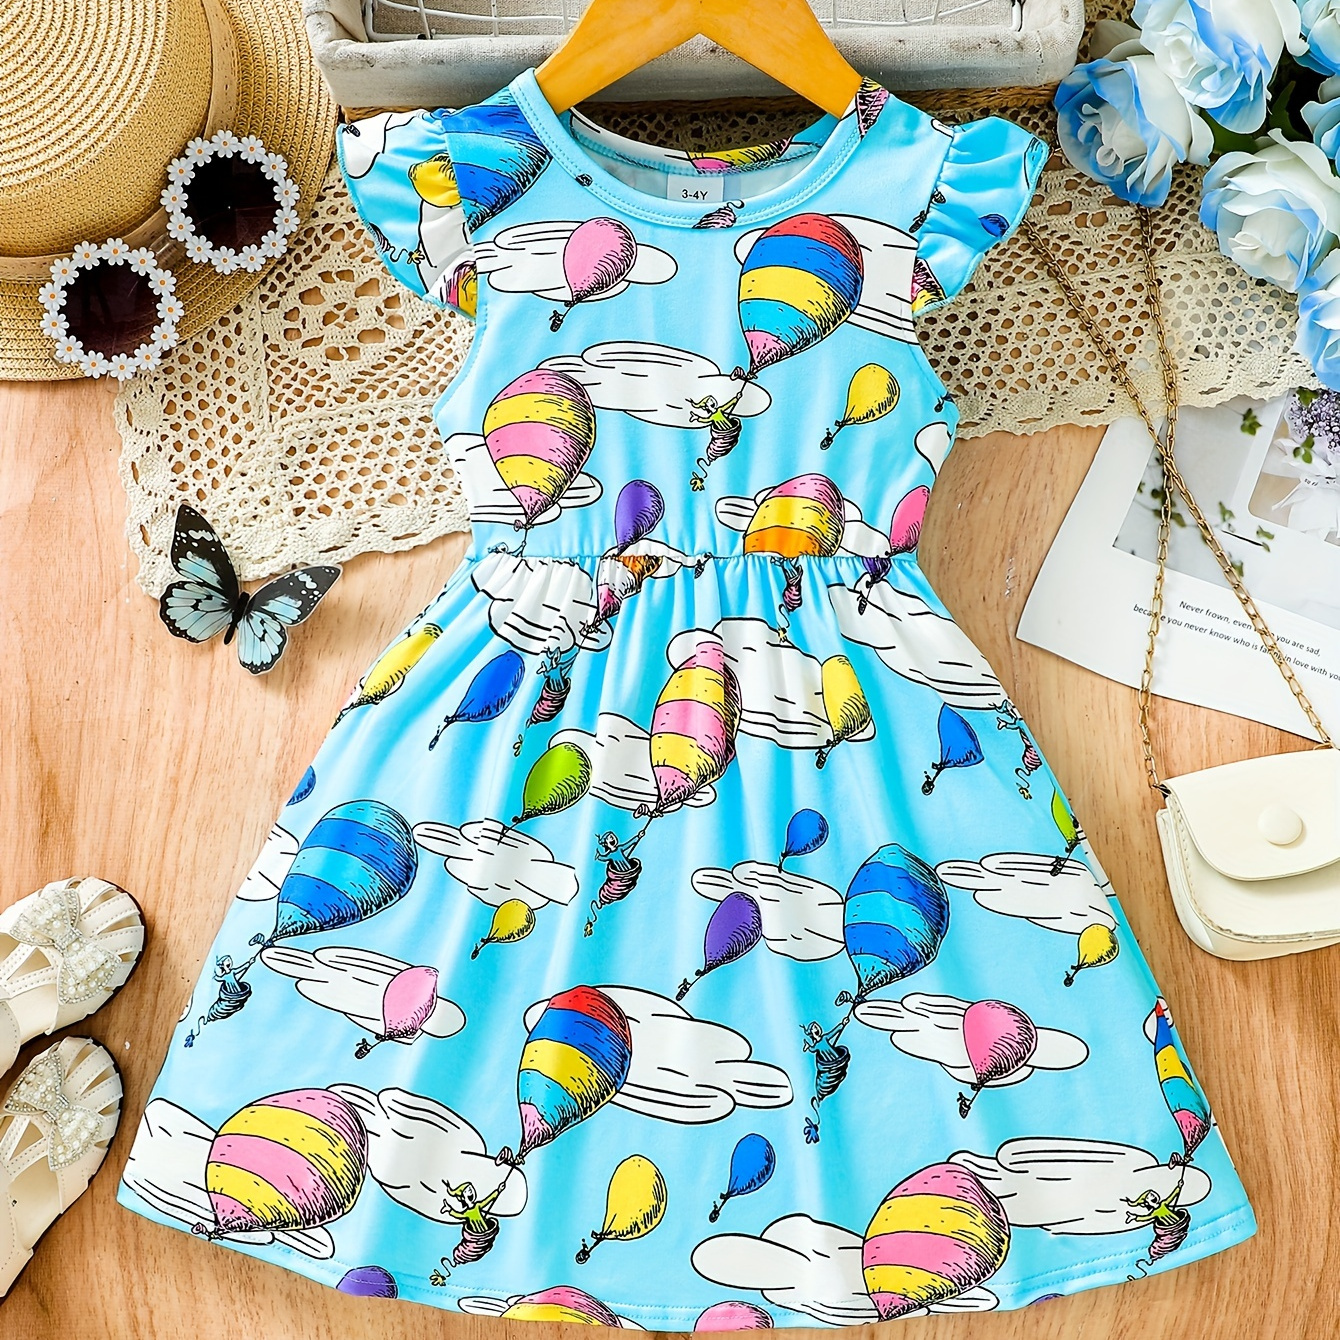 

Girls Casual Sweet Dress With Balloon Clouds Print For 3-7 Years Old